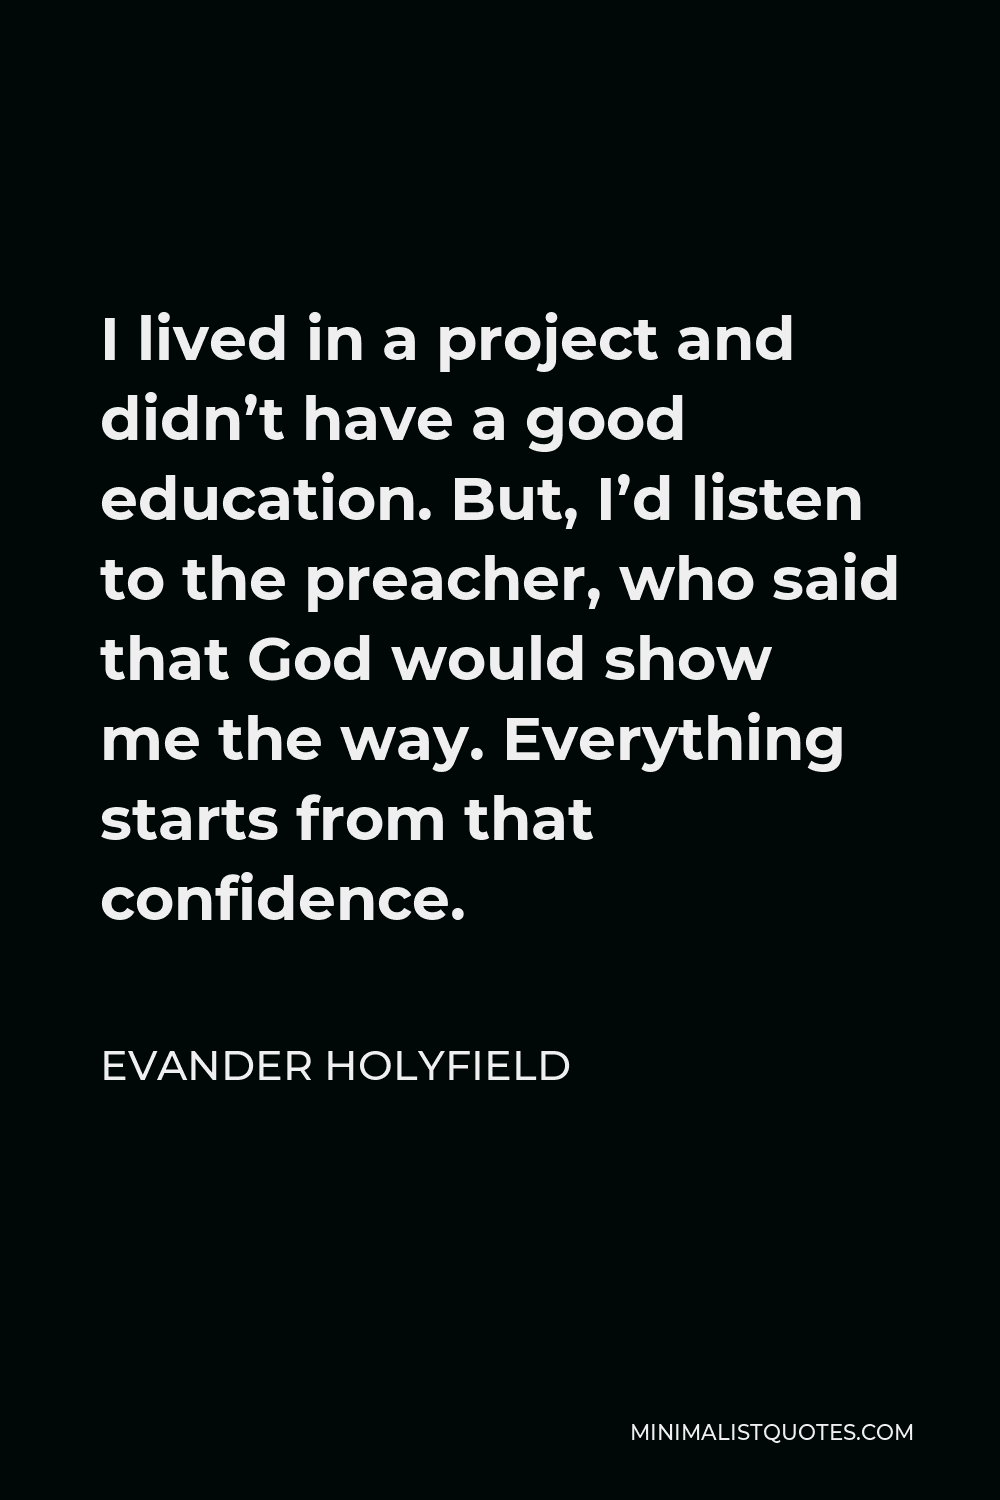 Evander Holyfield Quote - I lived in a project and didn’t have a good education. But, I’d listen to the preacher, who said that God would show me the way. Everything starts from that confidence.